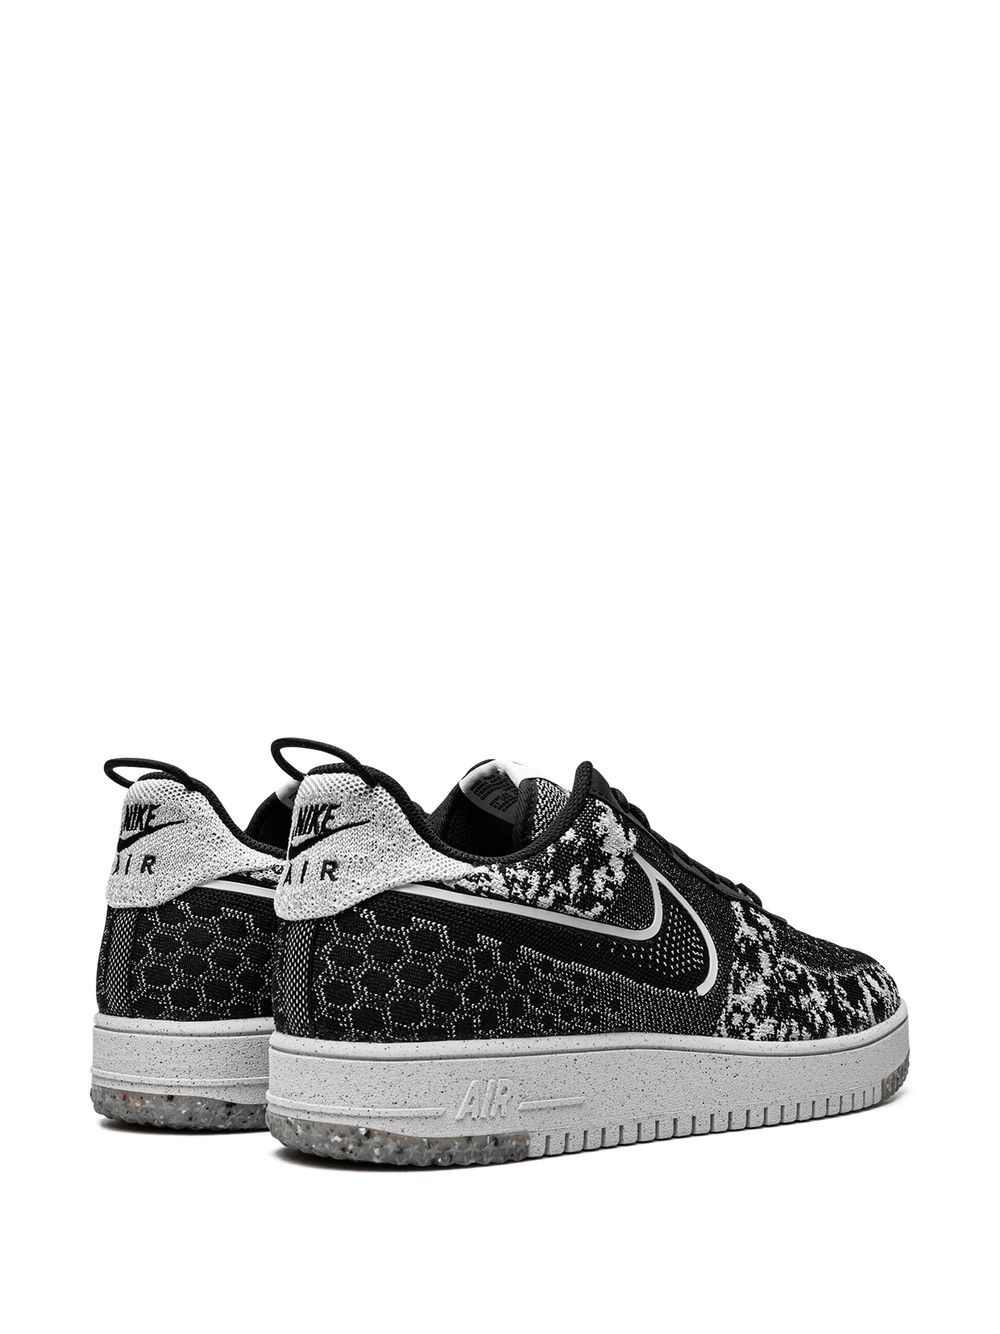 Air Force 1 Crater Flyknit "Black/White" sneakers - 3